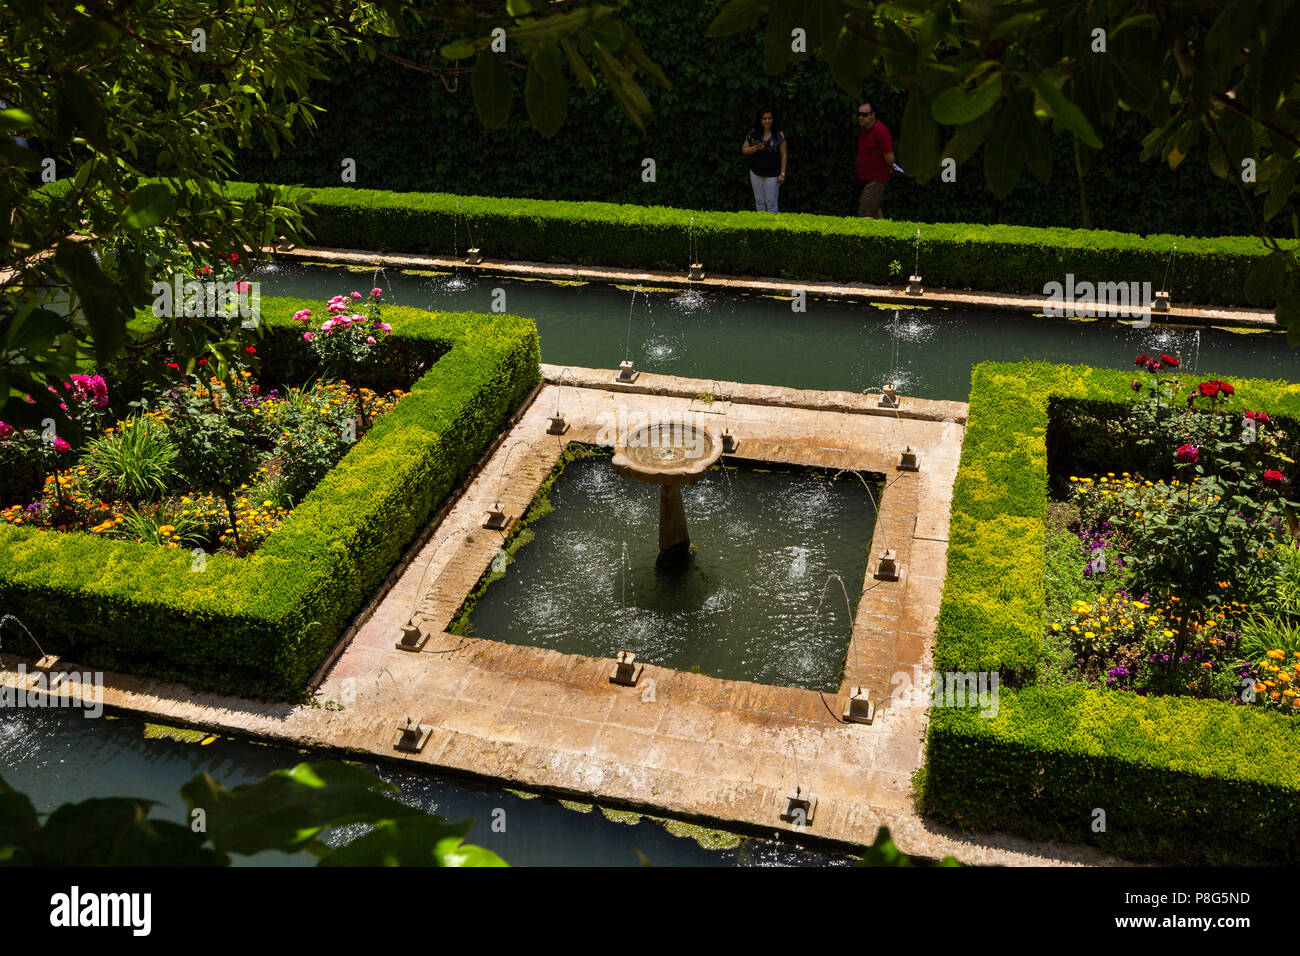 Generalife Palace gardens. Alhambra, UNESCO World Heritage Site. Granada City. Andalusia, Southern Spain Europe Stock Photo